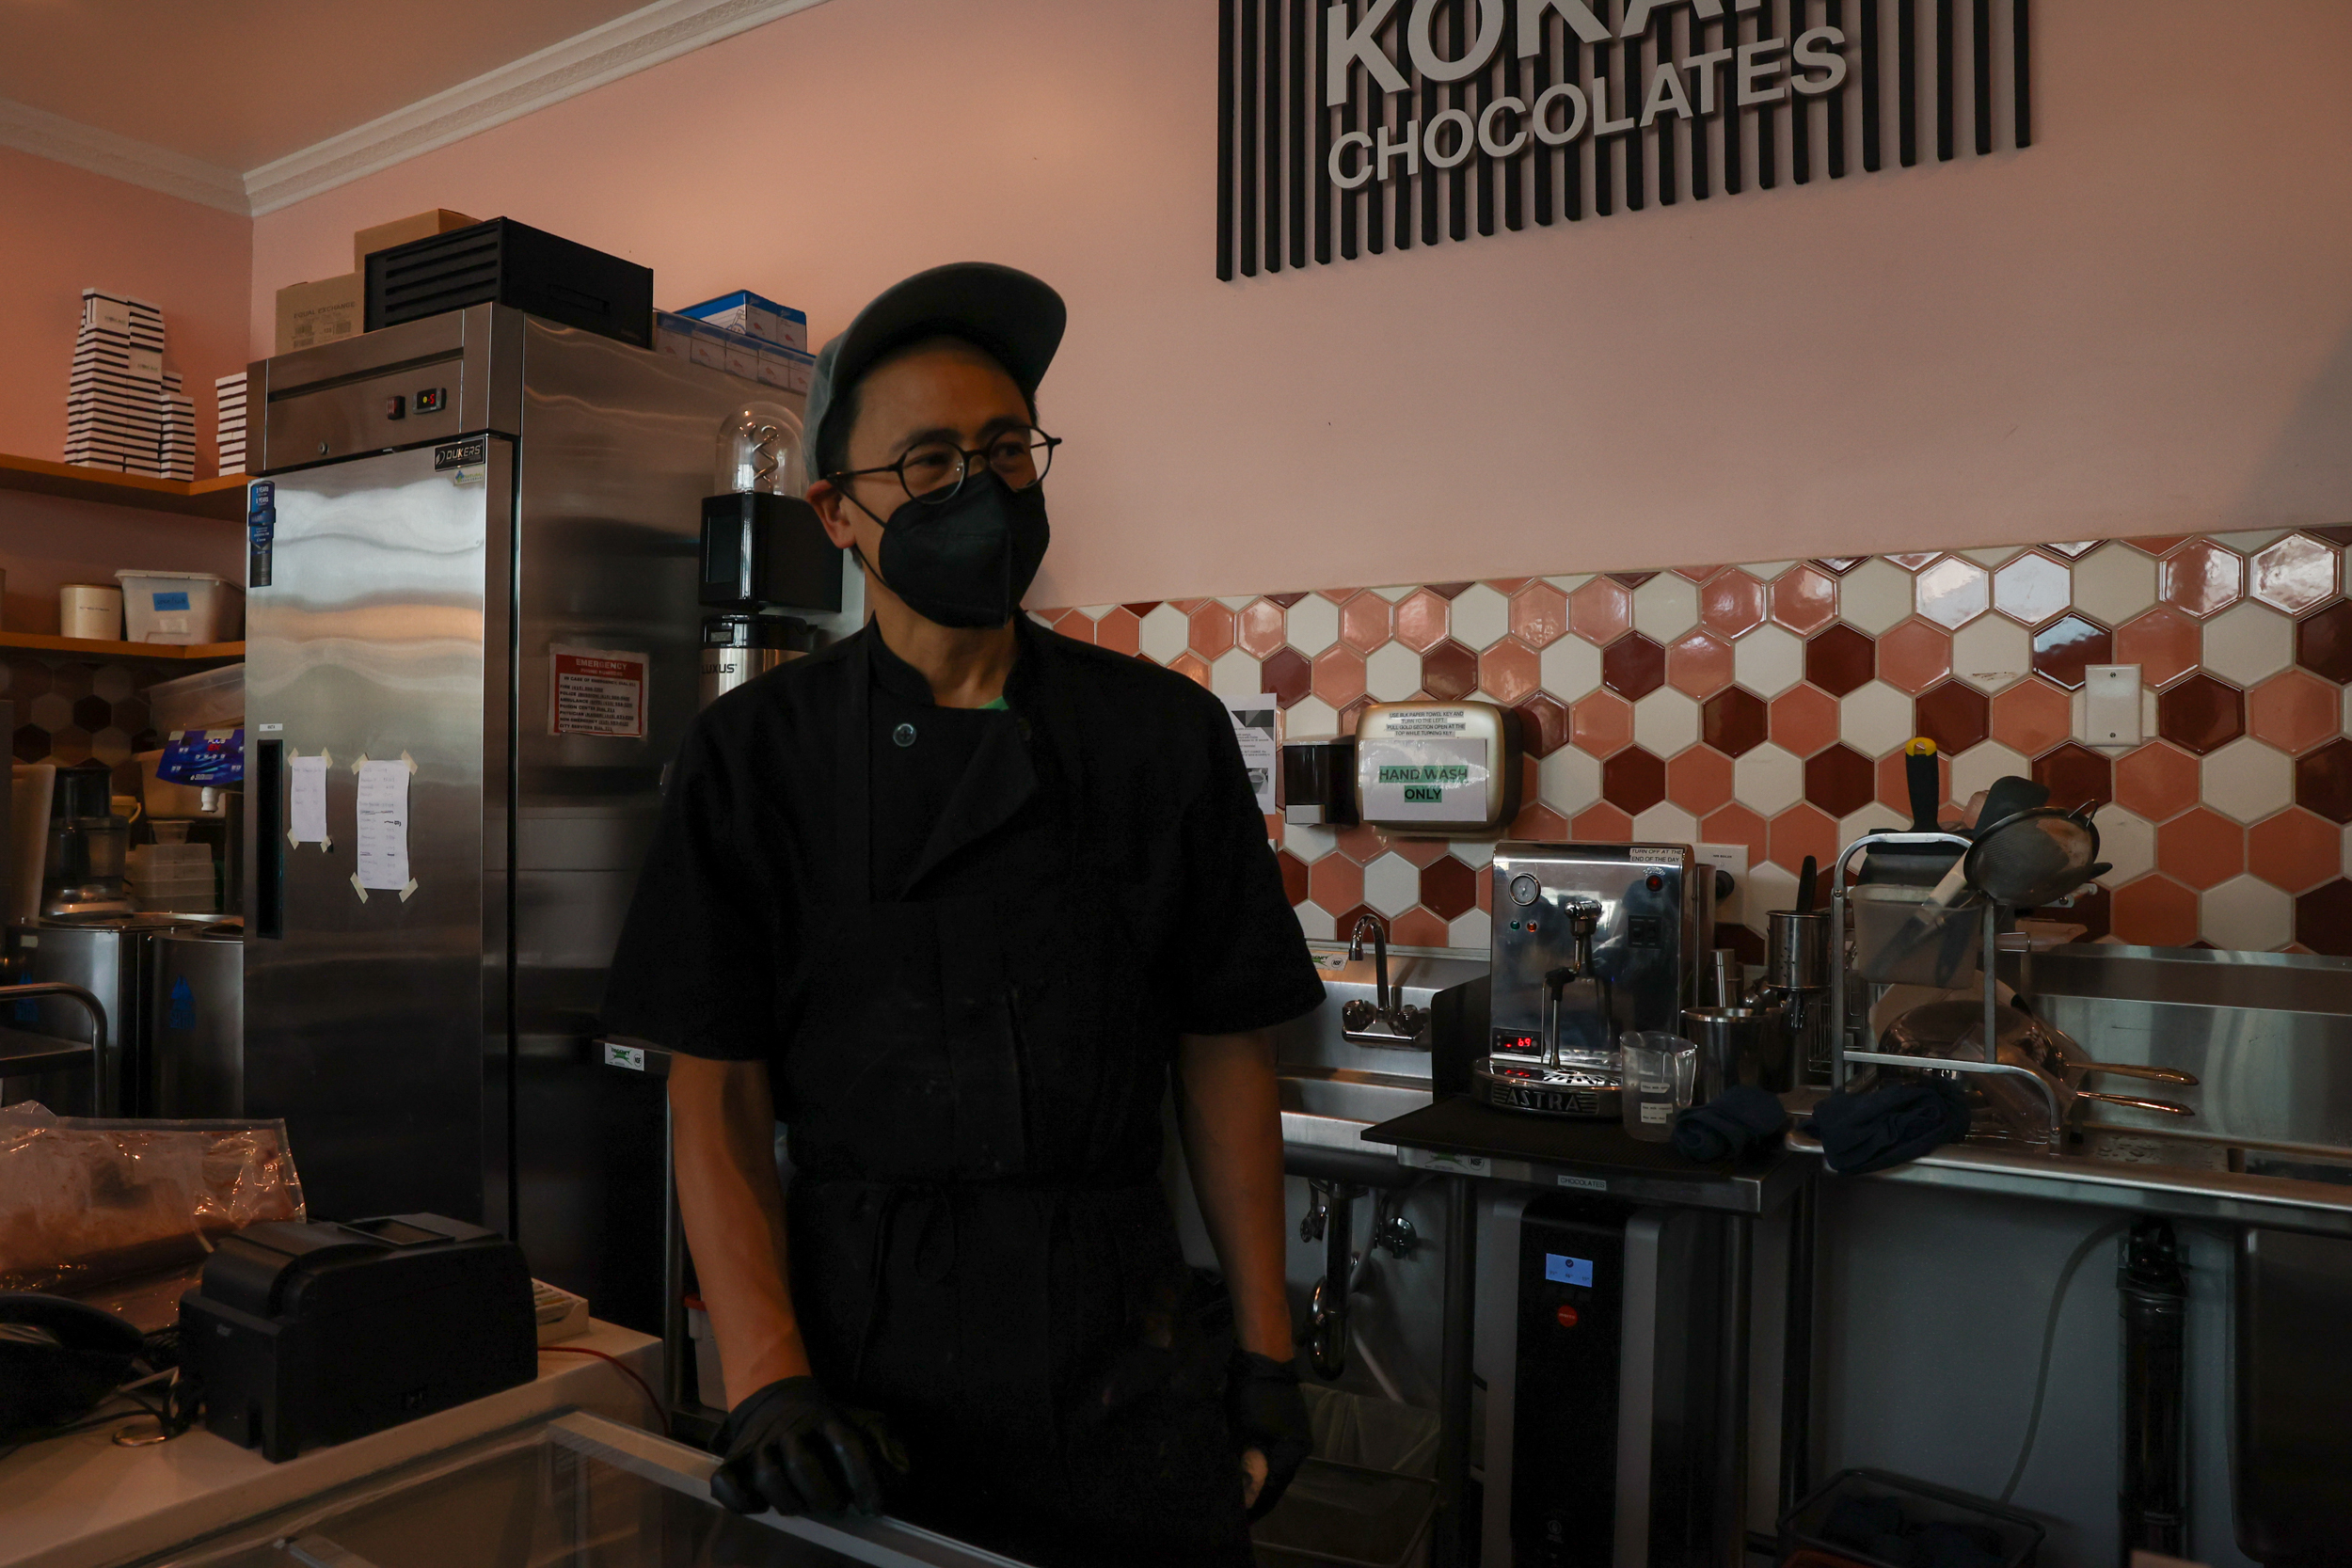 A man in a mask stands in a kitchen.